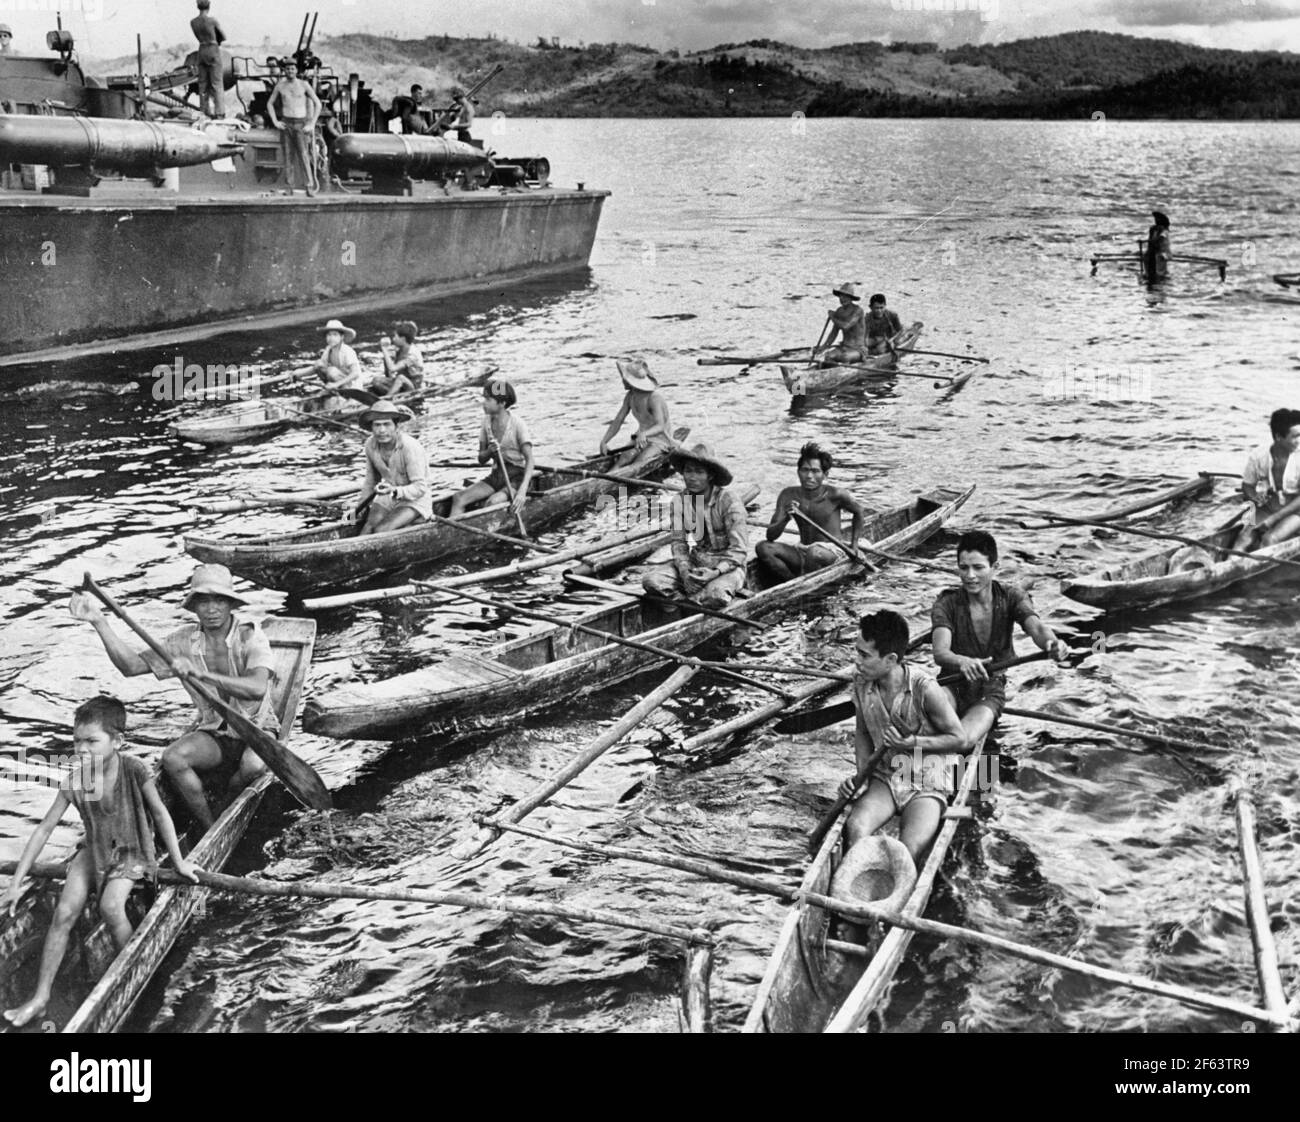 Battle of Surigao Strait - Rescue operations in Surigao Strait, Philippines, searching for Japanese survivors, October 1944 Stock Photo